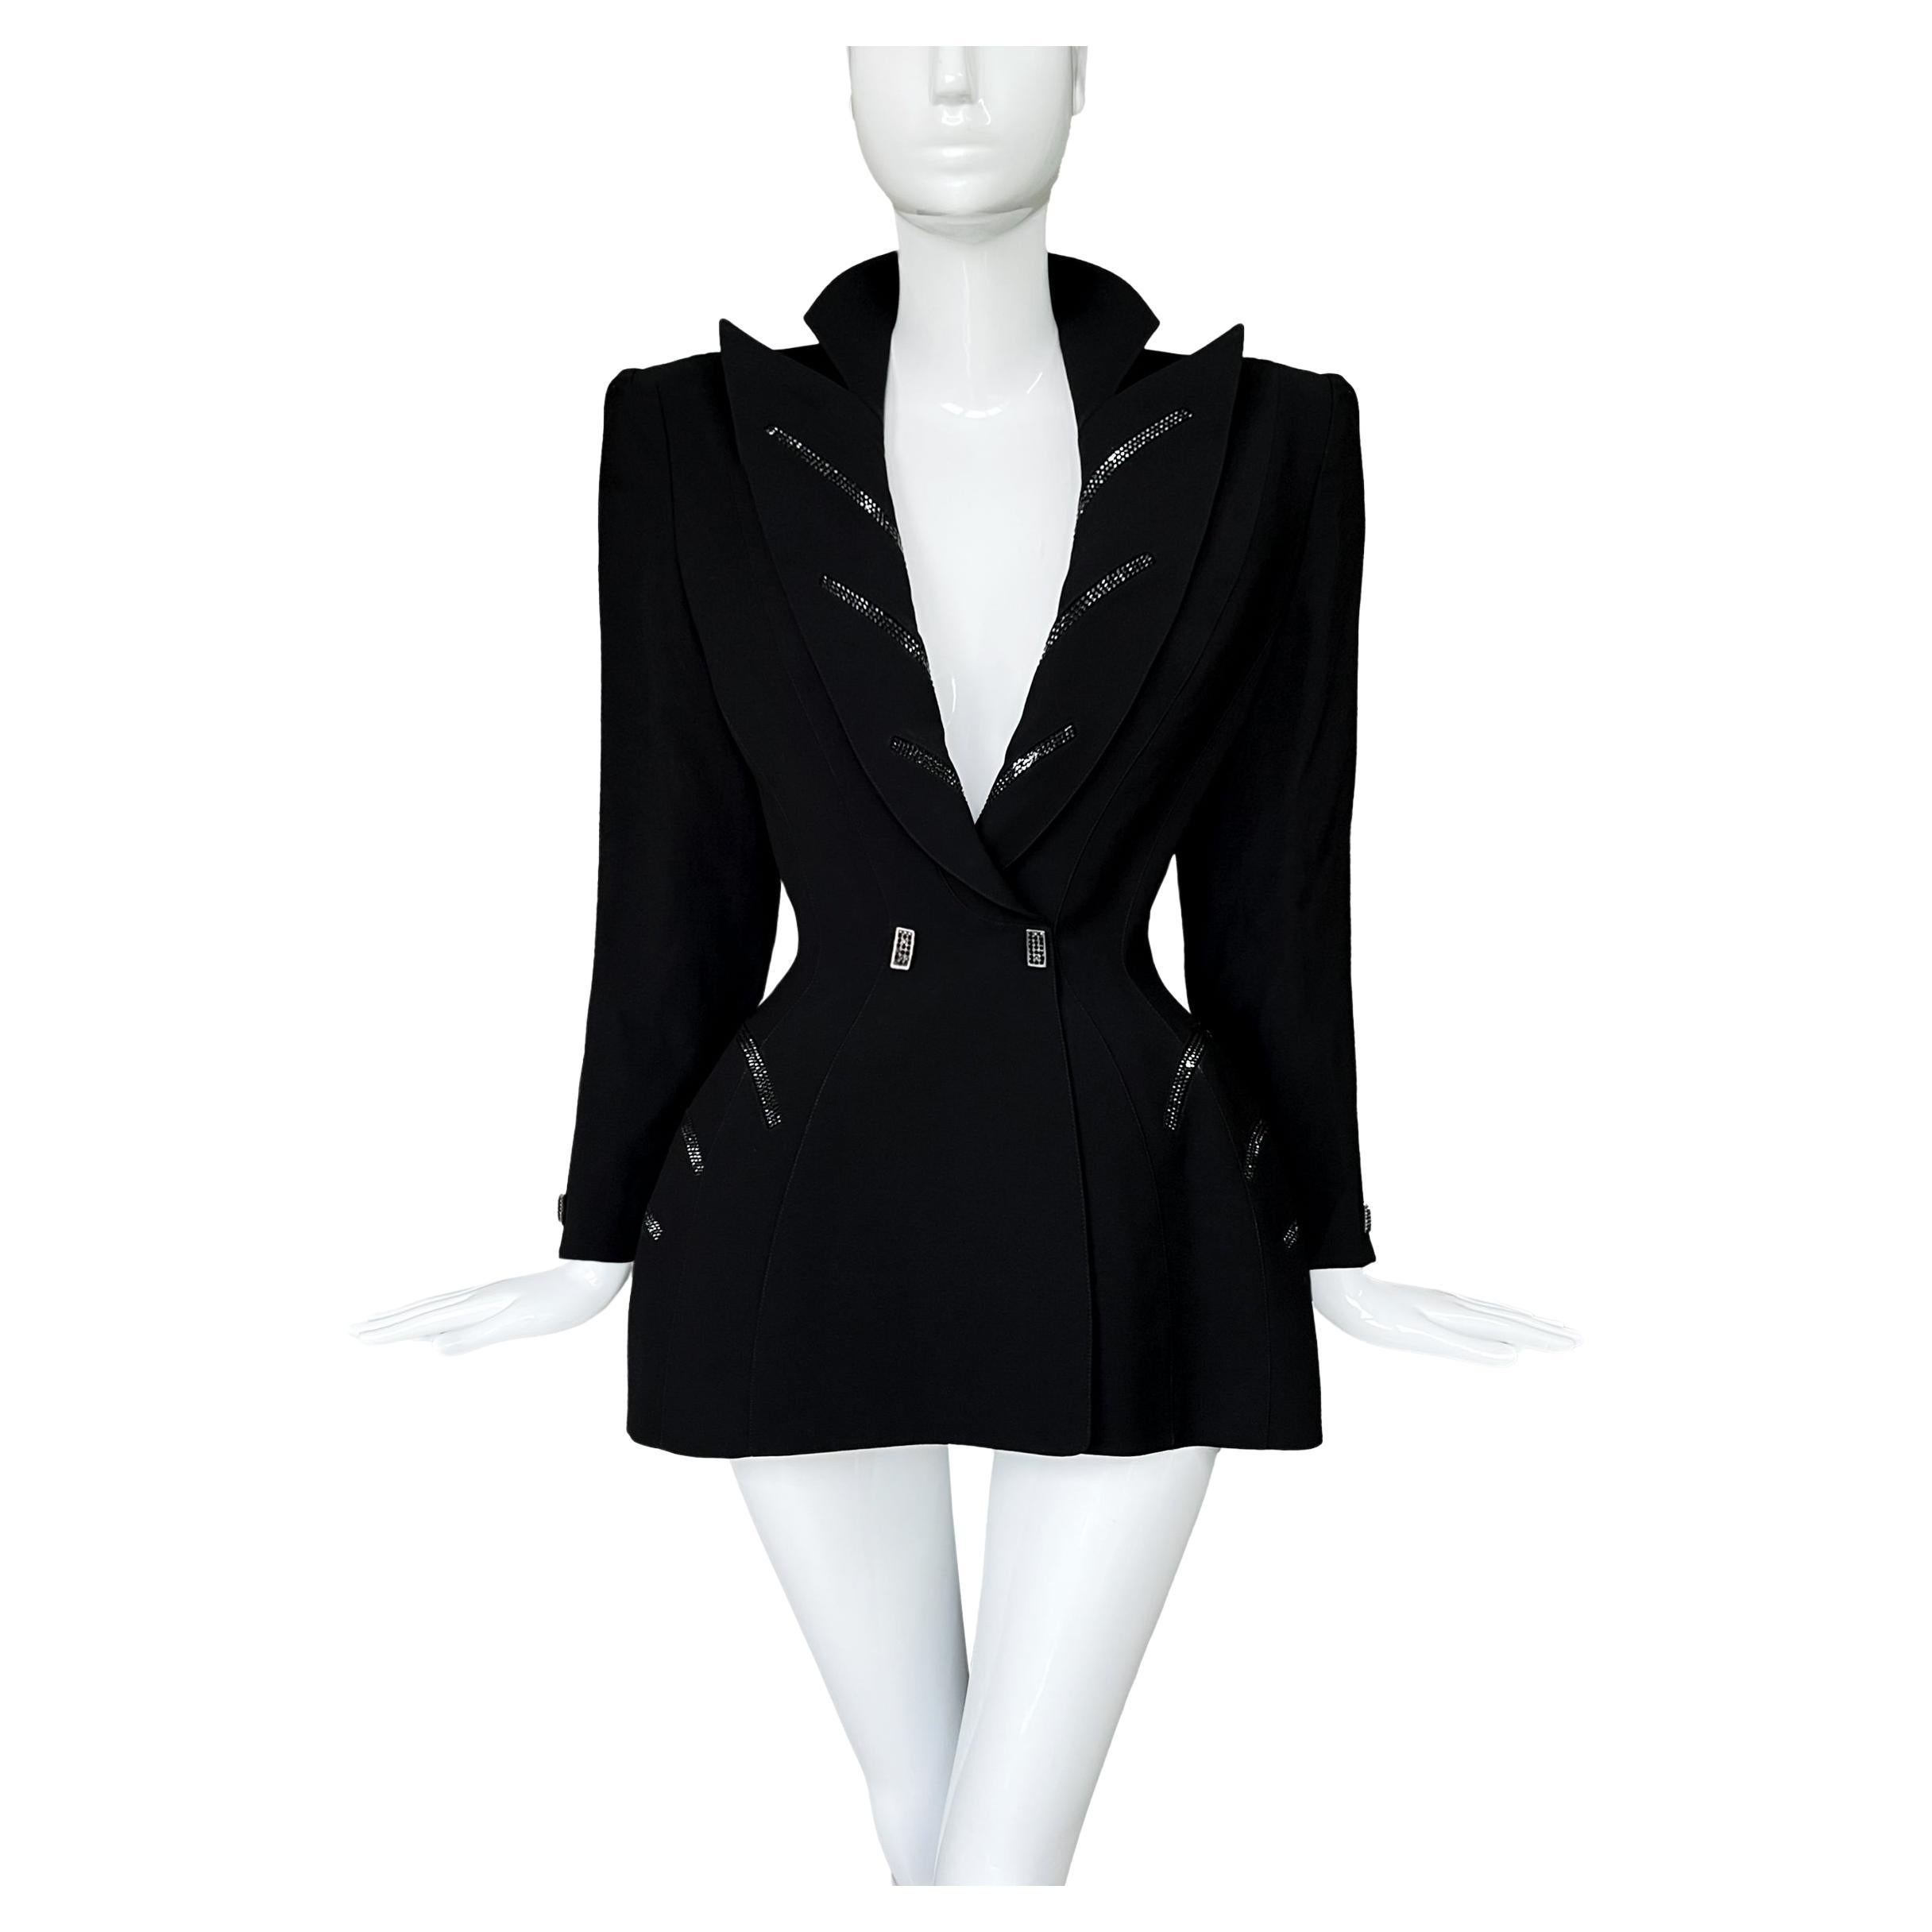 Thierry Mugler Jacket FW 1998 Glamour Dramatic Black Glitter Details For Sale